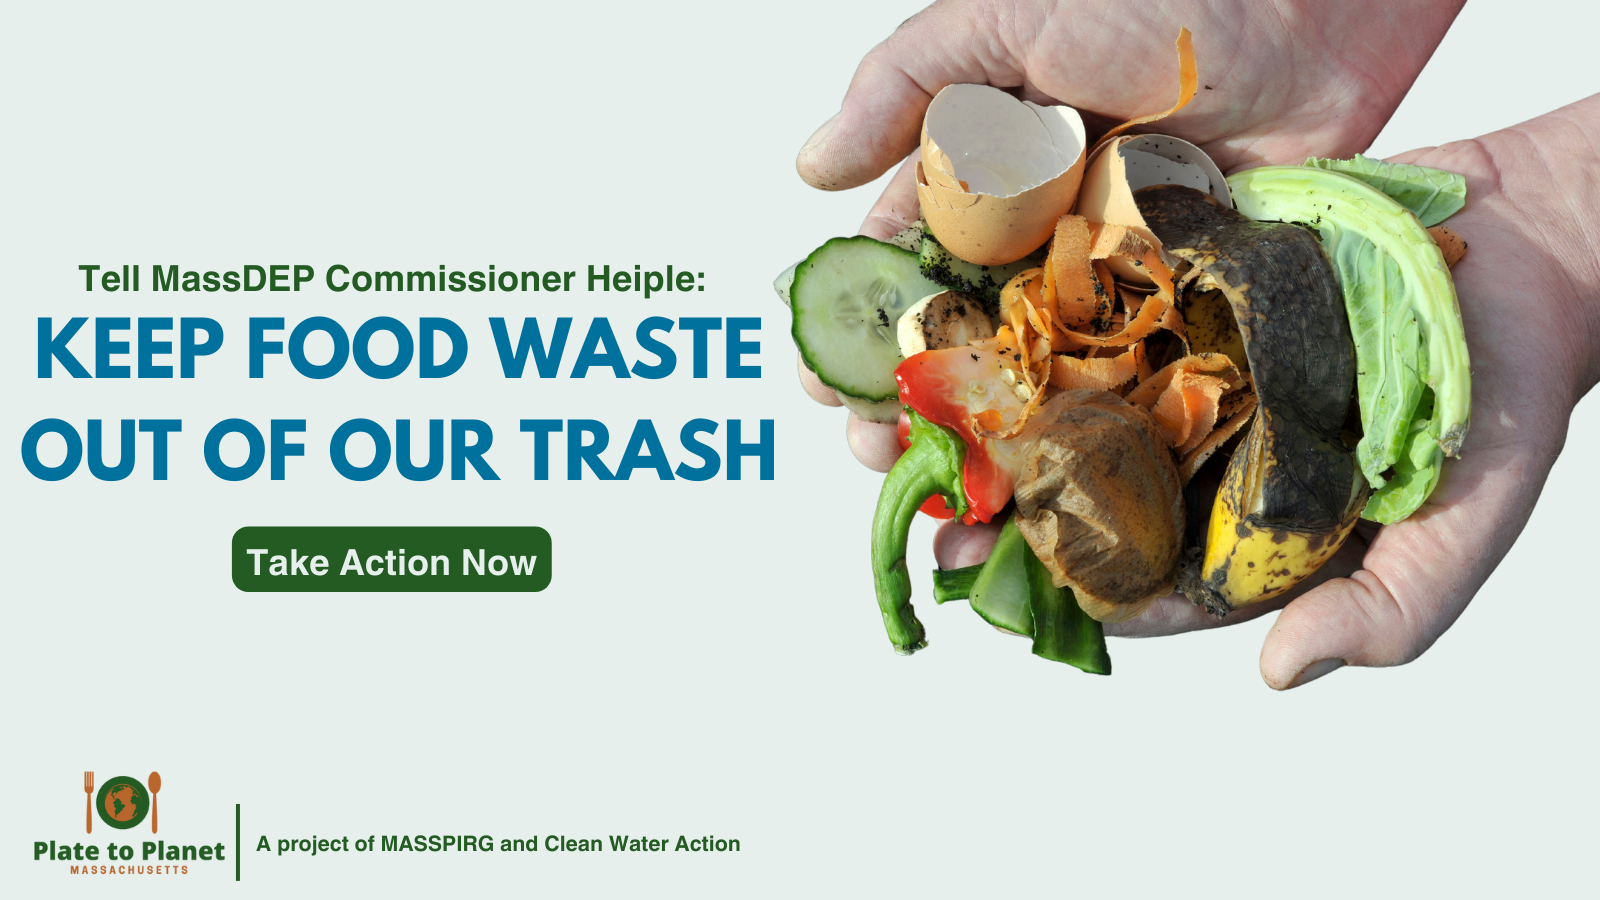 Keep Food Waste Out Of Our Trash - Take Action Now!